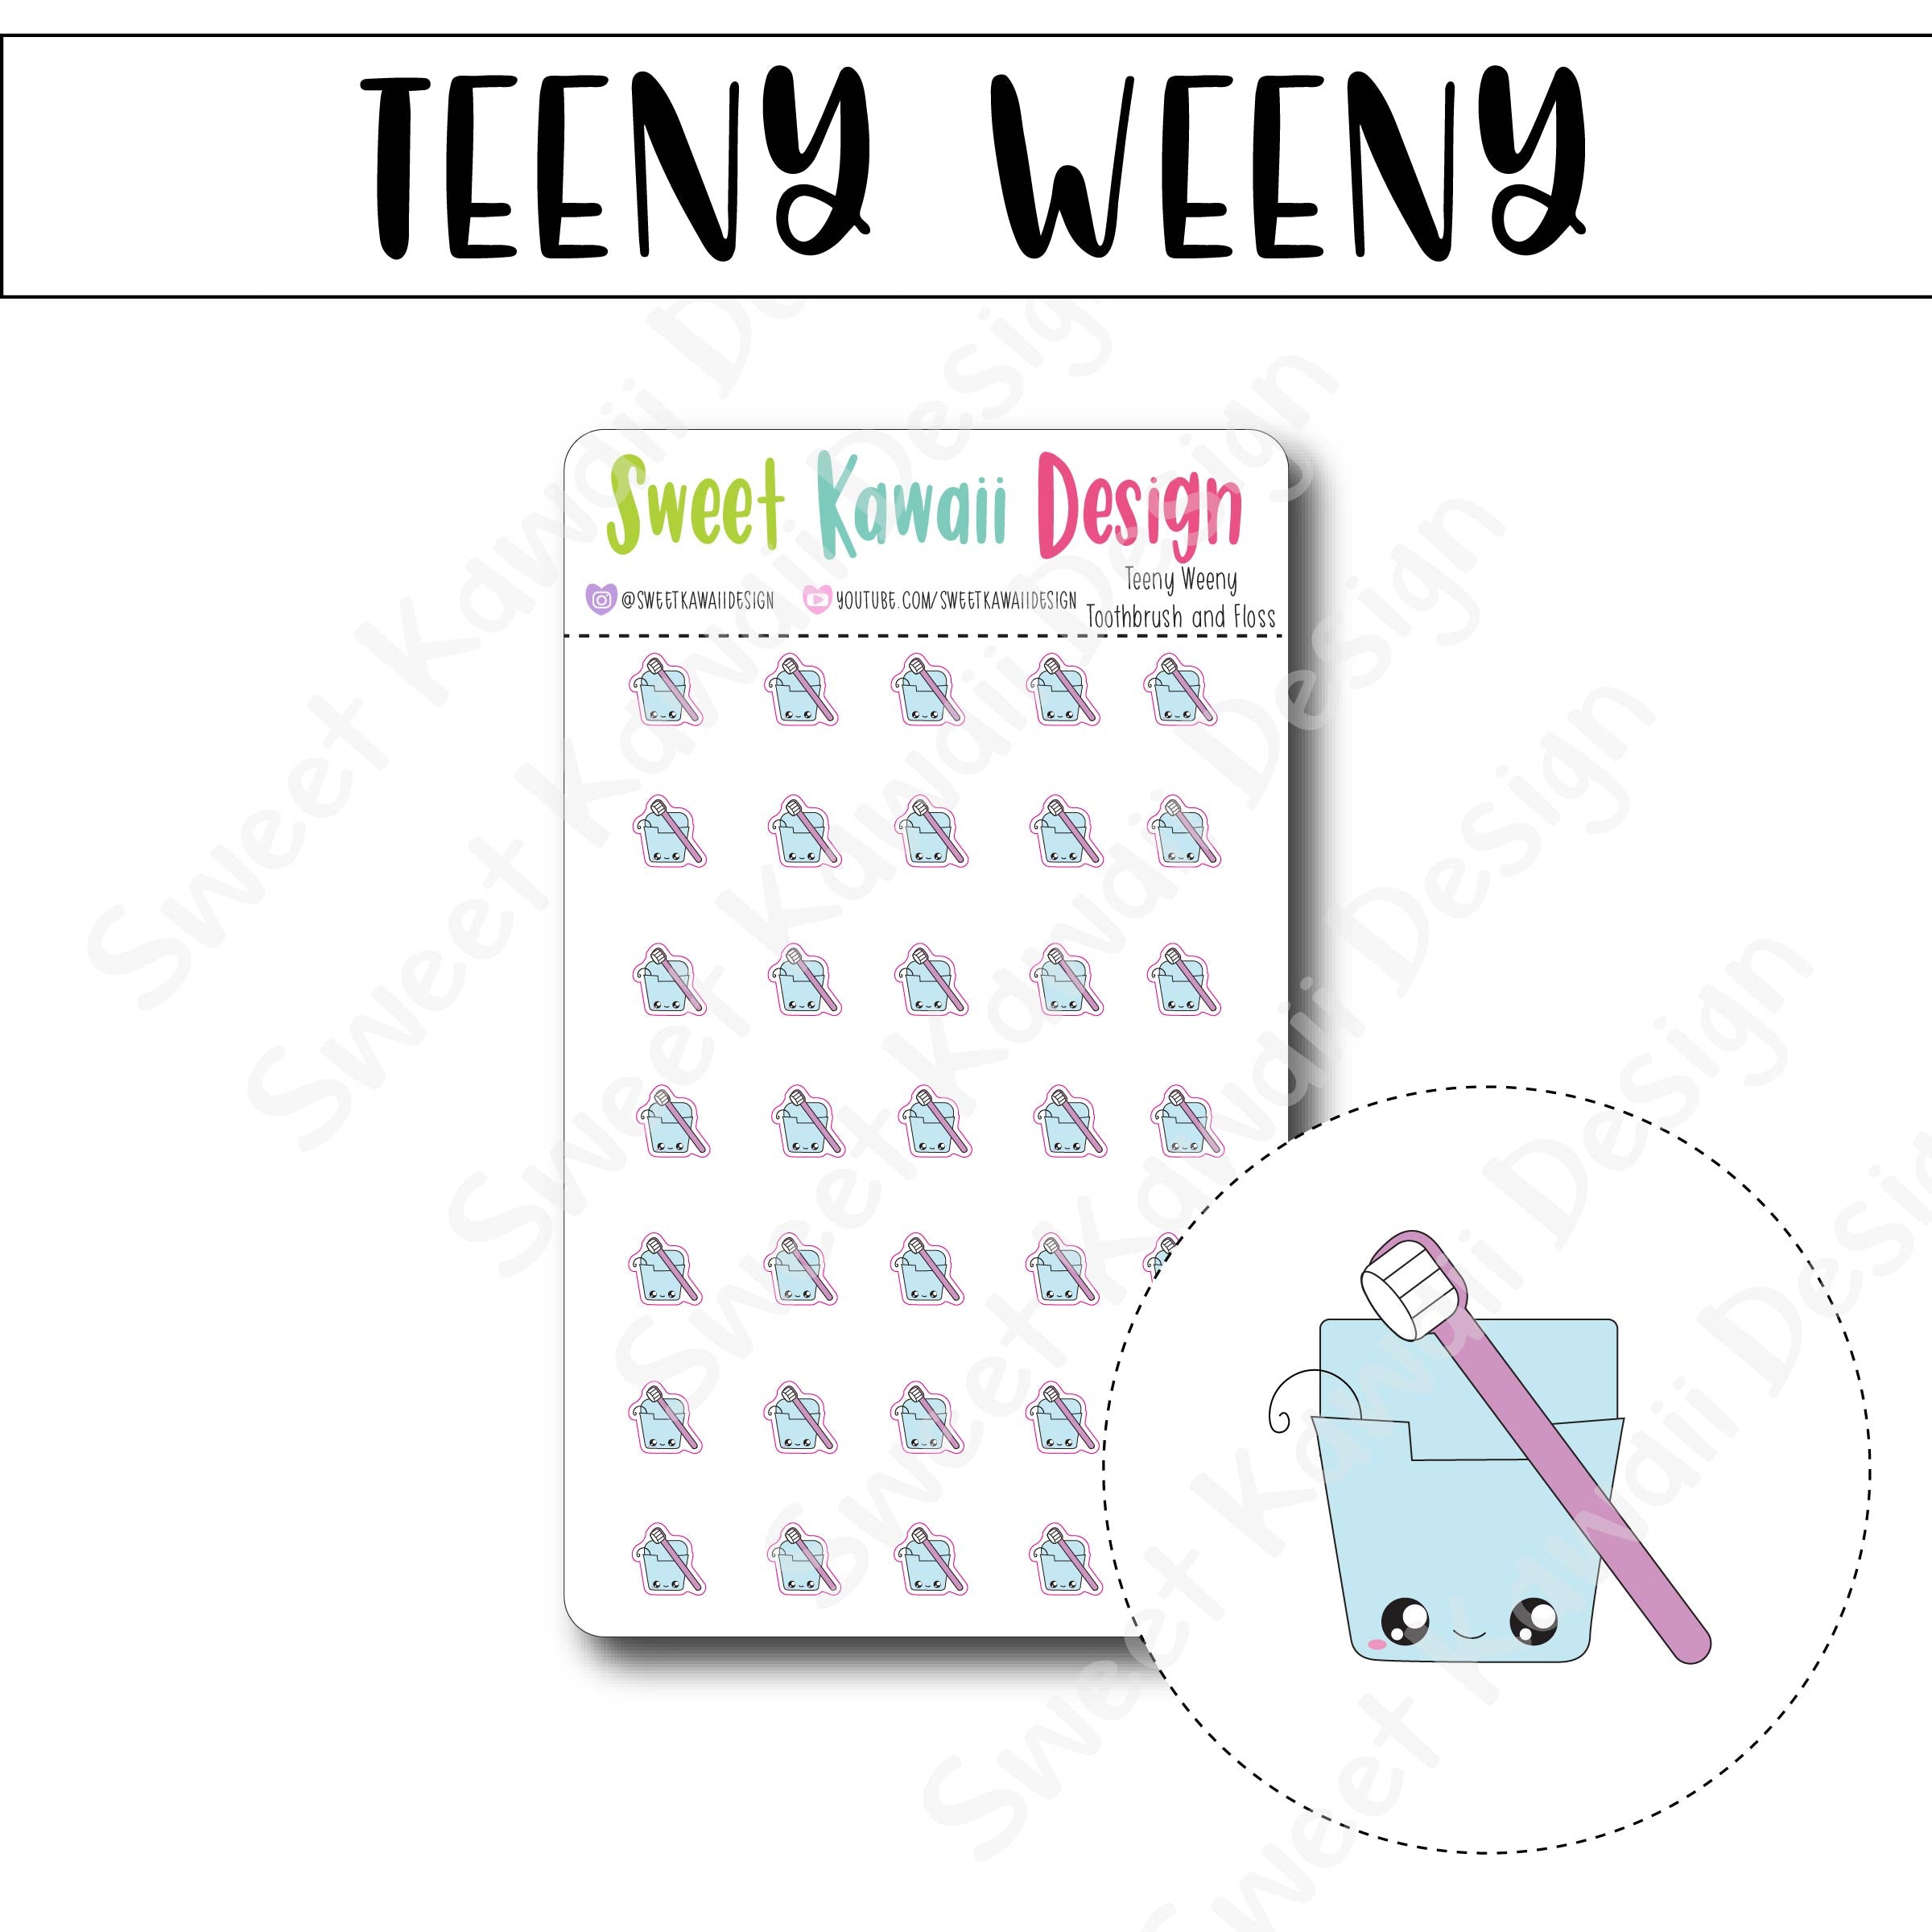 Teeny Toothbrush and Floss Stickers